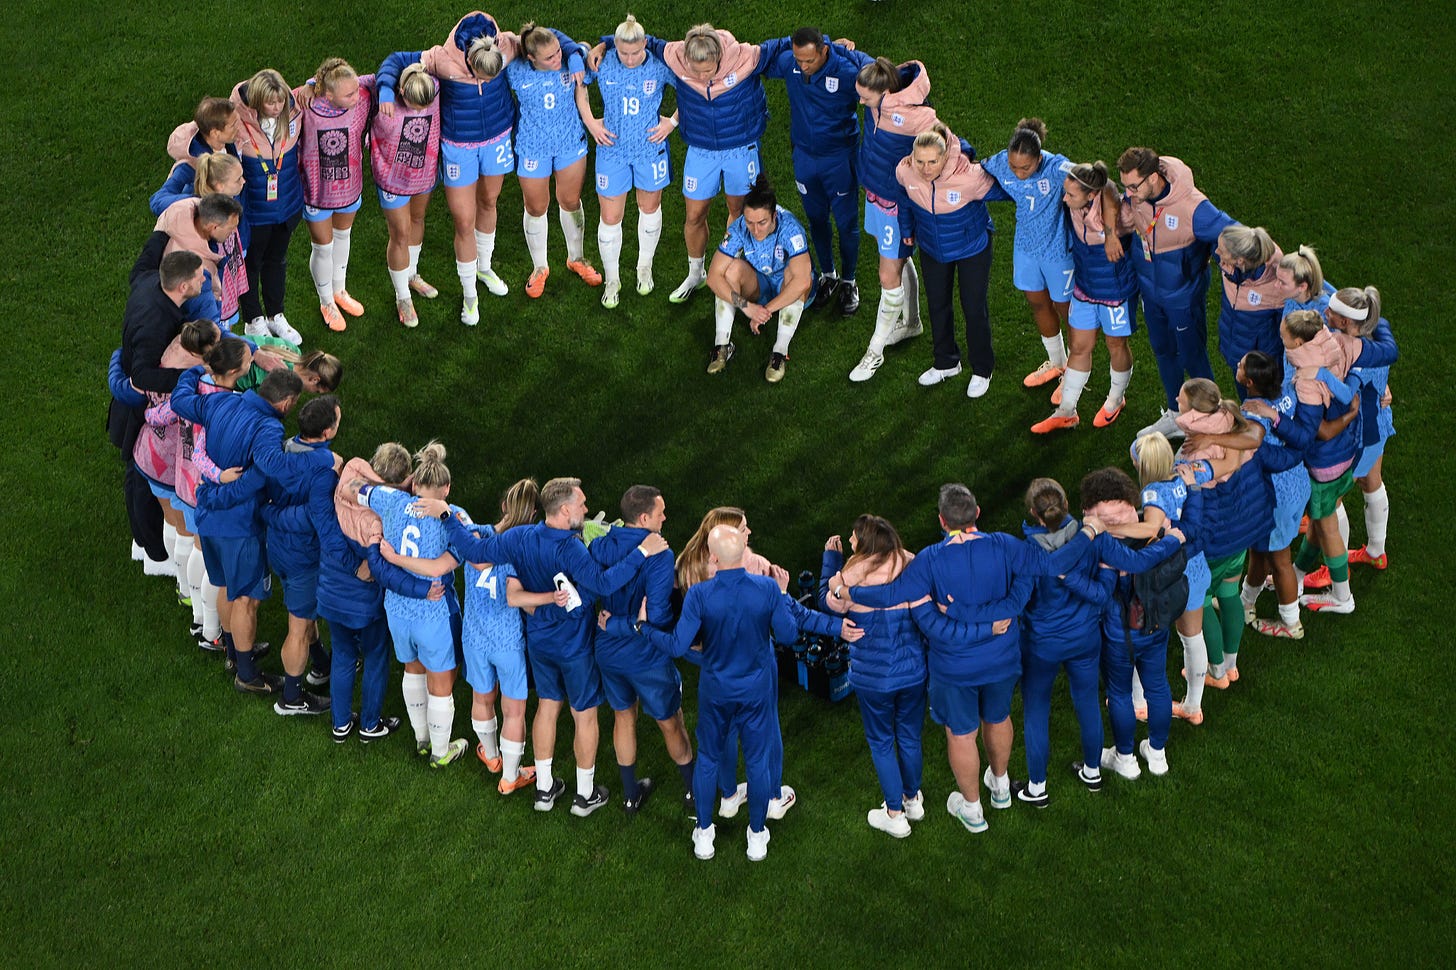 The England players and staff huddle after the game.